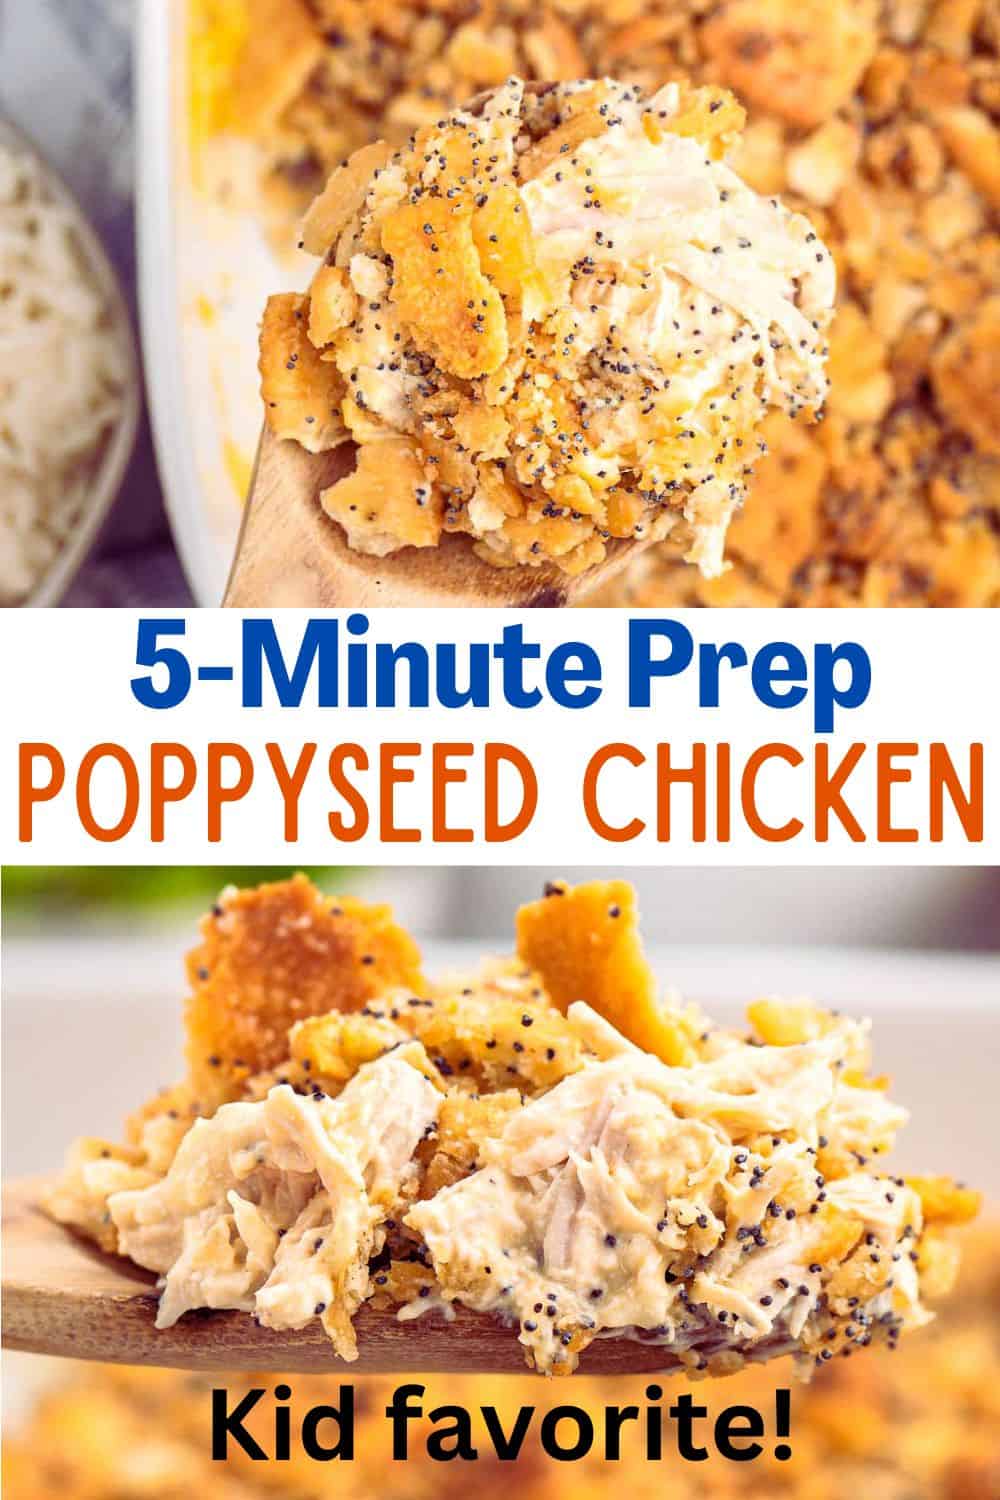 Poppy seed chicken is a favorite creamy casserole topped with buttery Ritz crackers. We serve our chicken poppy seed casserole over cooked rice. Made with few ingredients, this recipe is an easy family dinner!